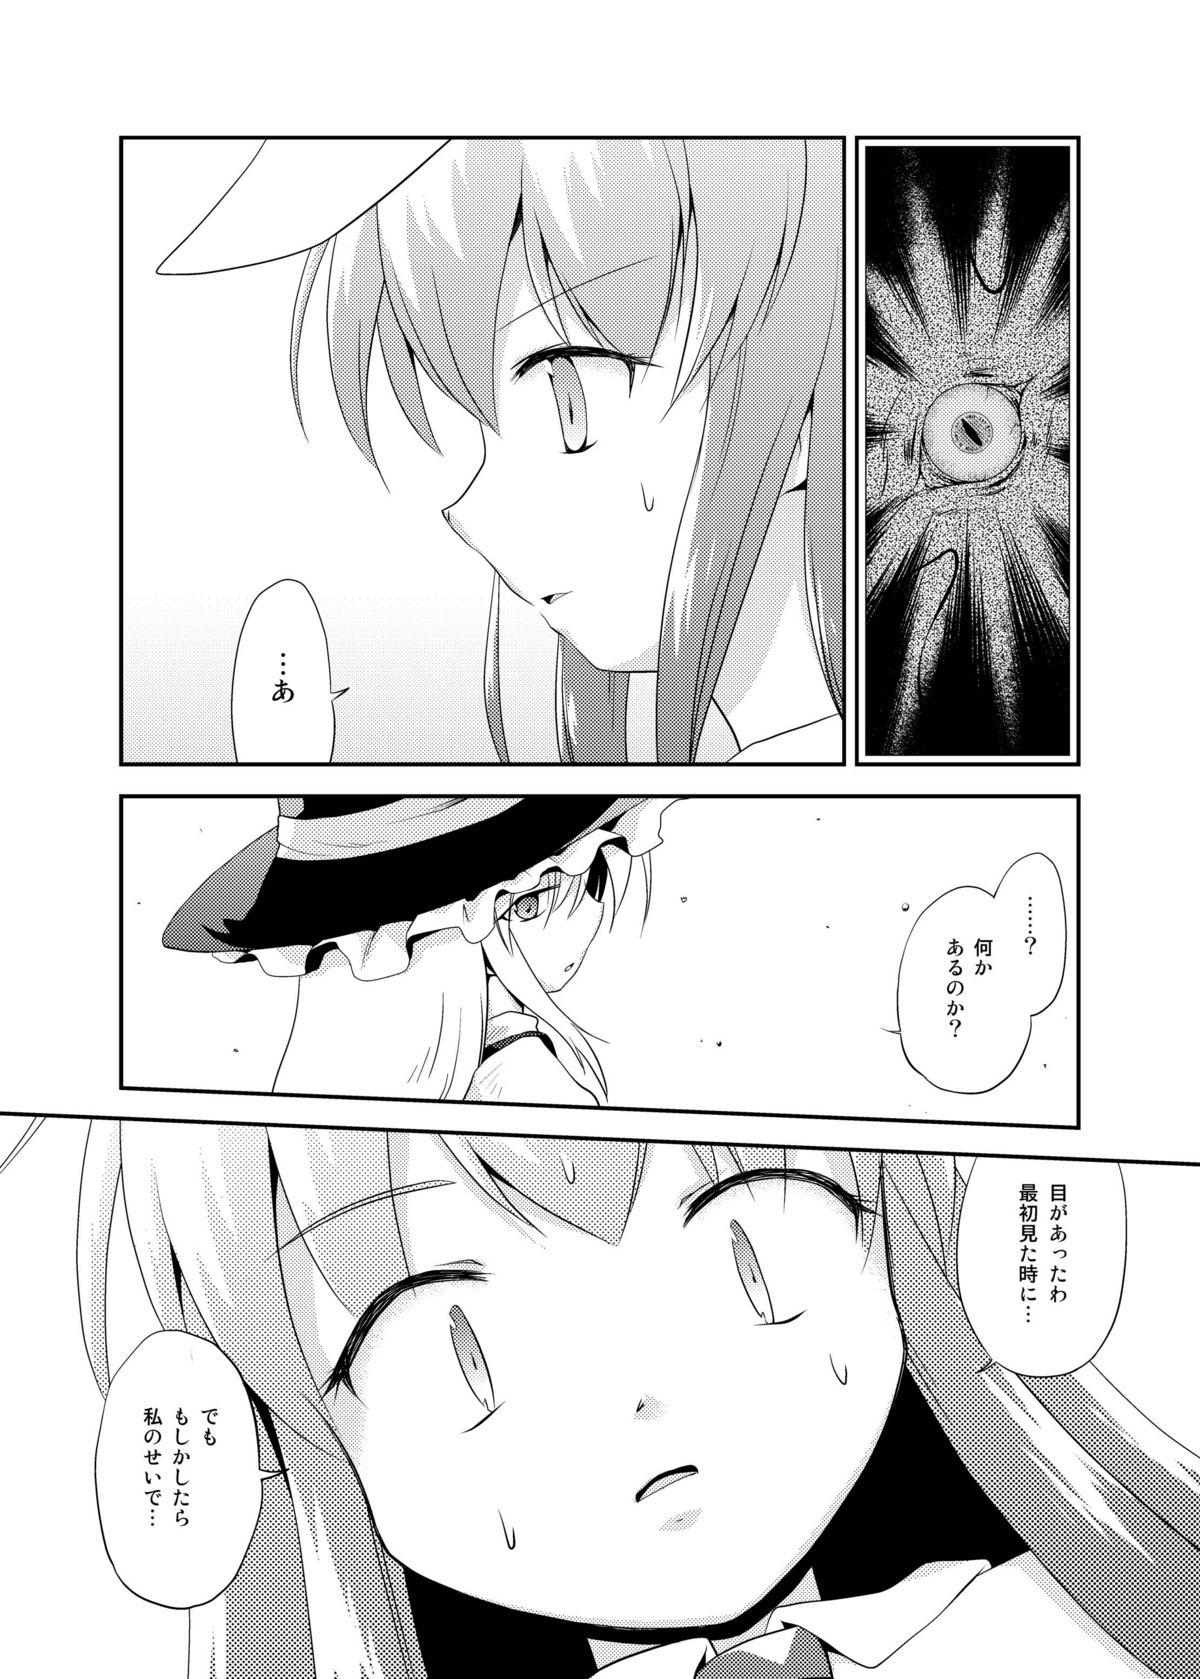 Jerking DISARM CLOTHES - Touhou project 18 Porn - Page 5